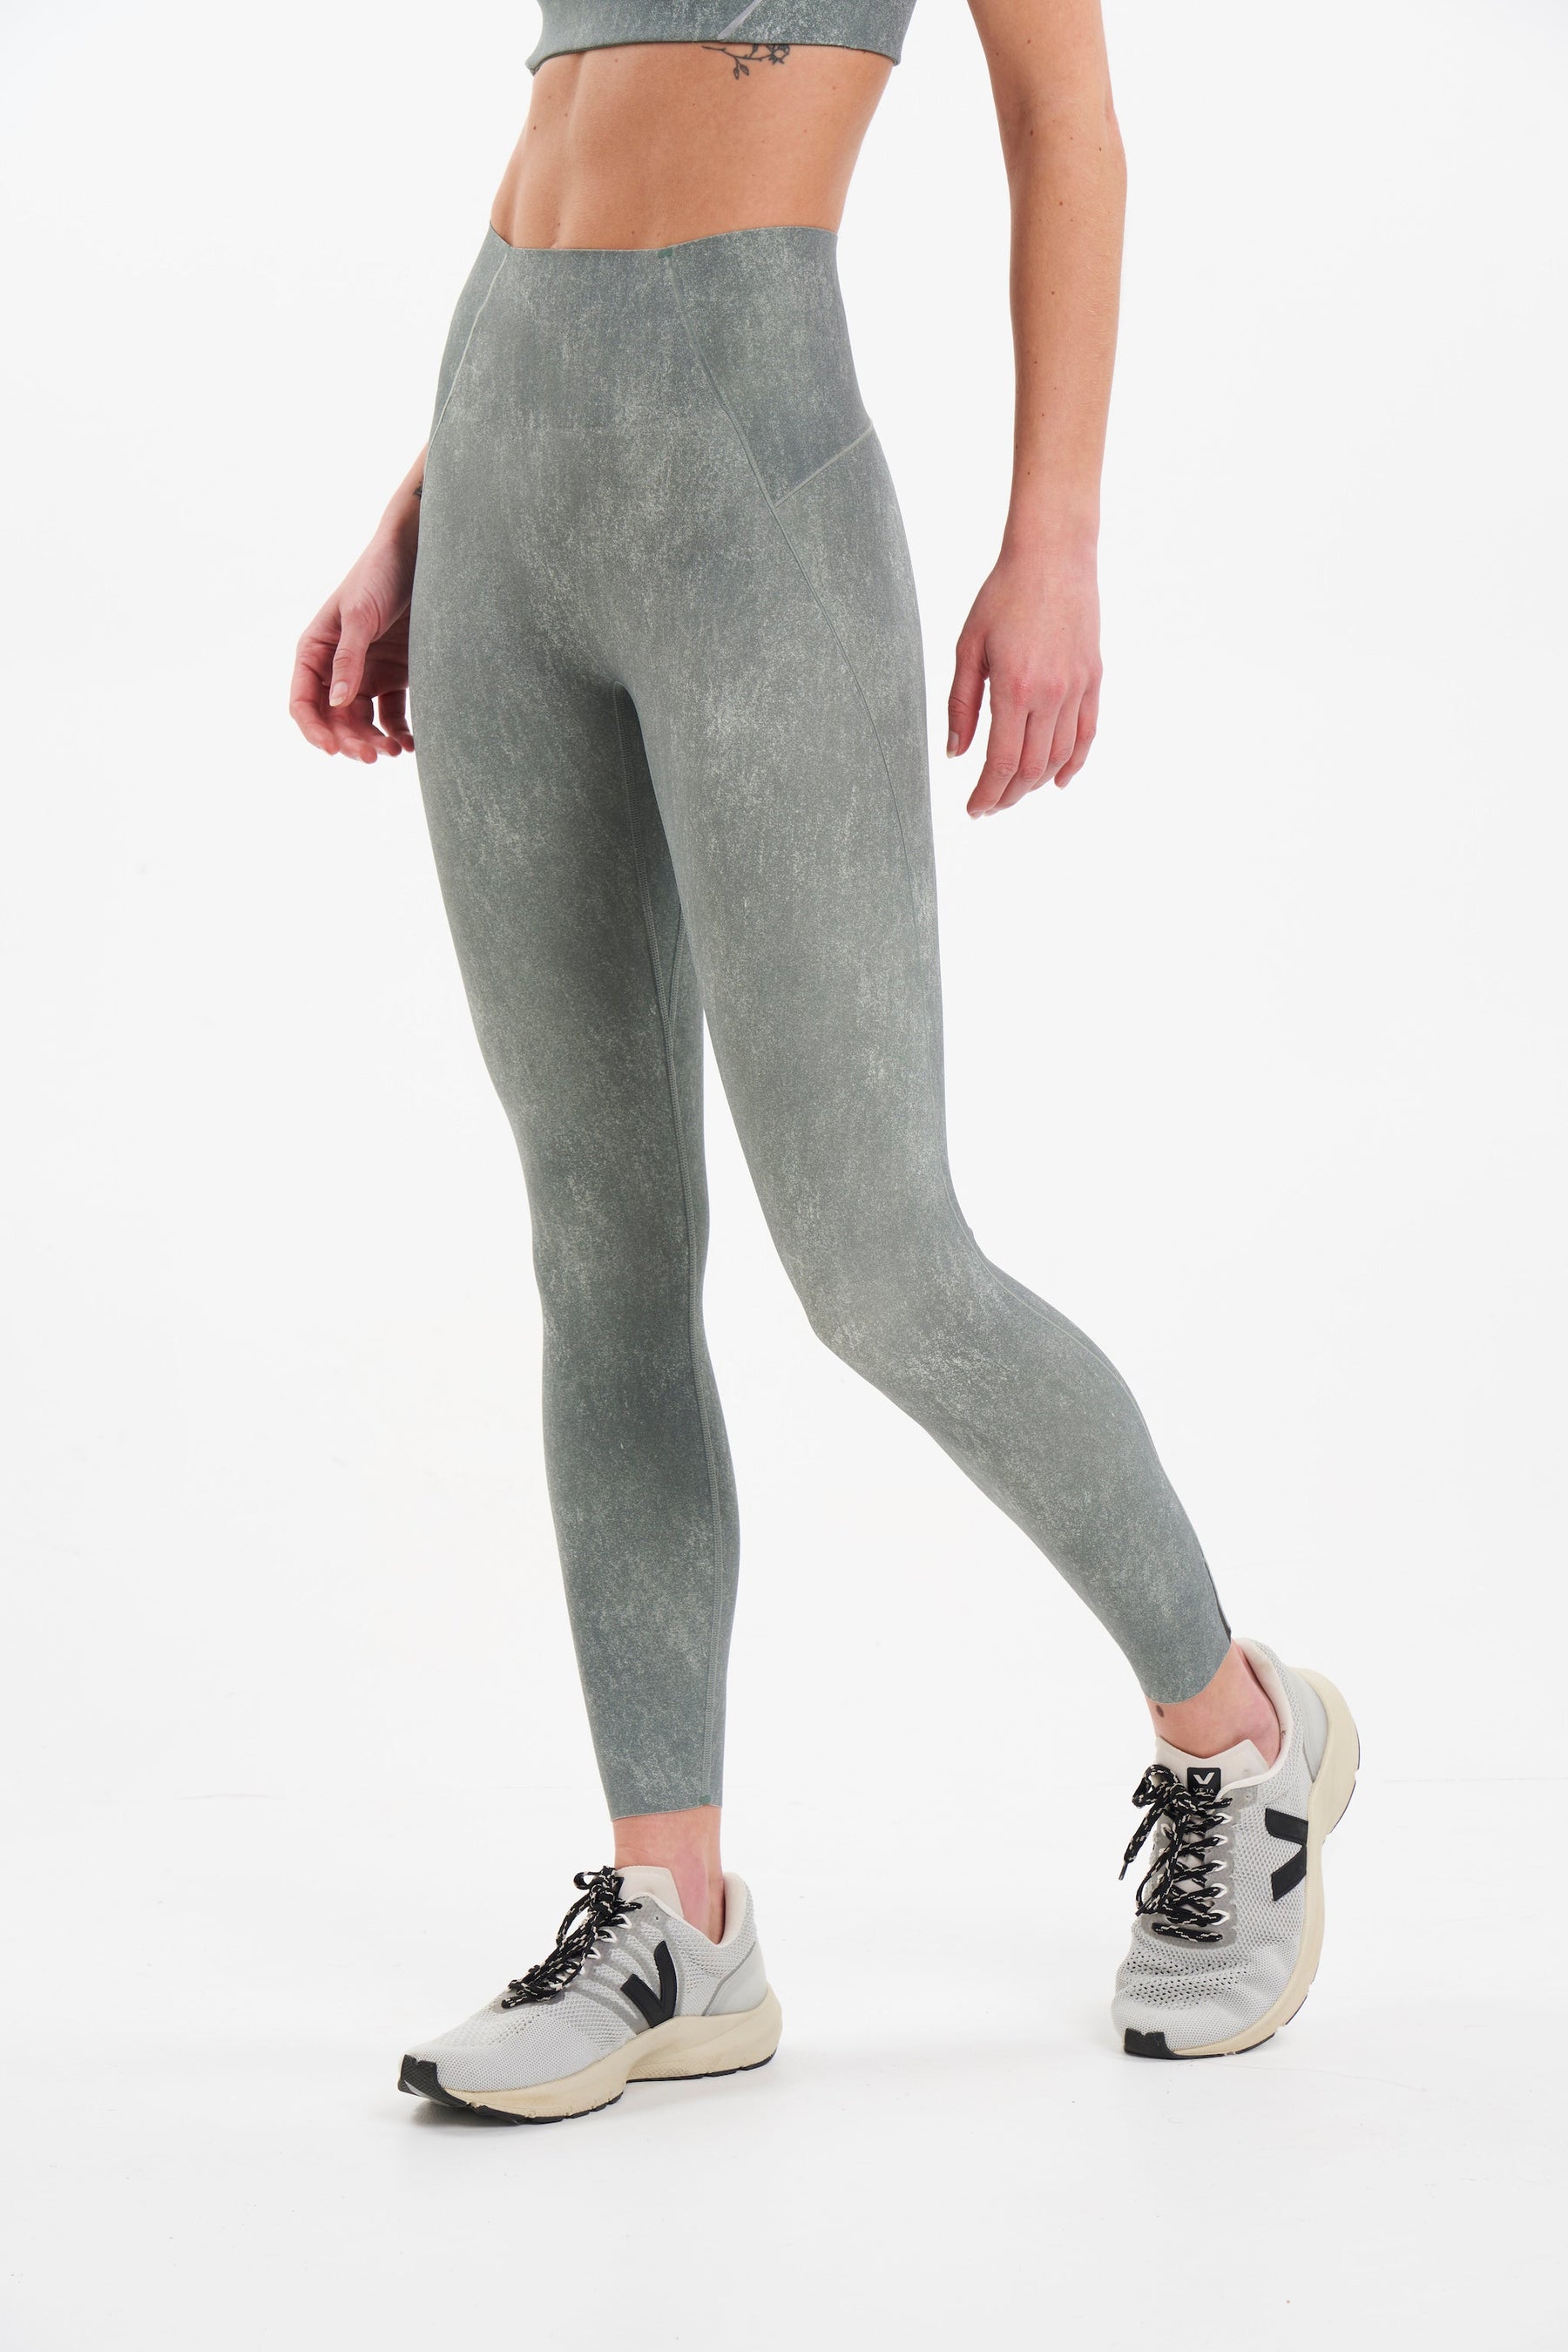 Sustainable athletic tights 7/8 length high waisted lululemon inspired